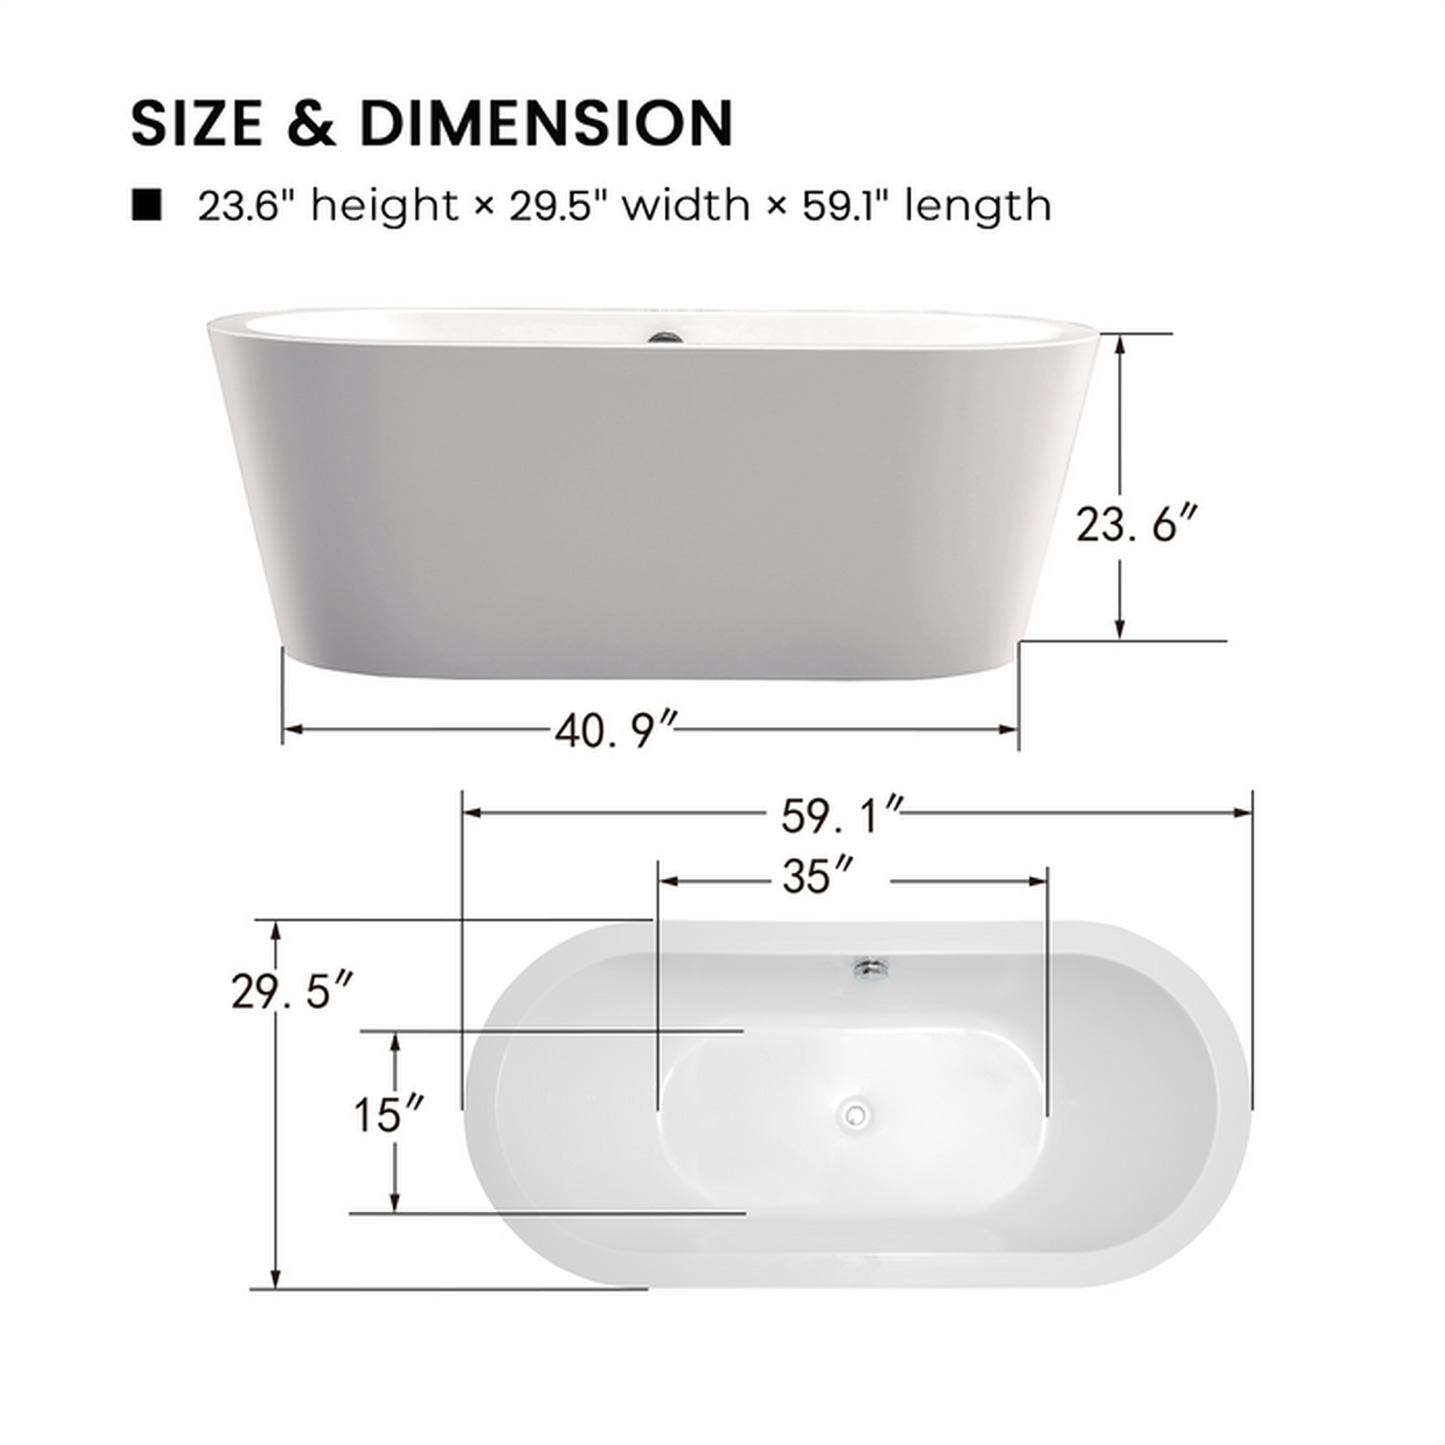 Vanity Art 59" x 32" White Acrylic Modern Stand Alone Soaking Tub With Polished Chrome Pop-up Drain, Round Overflow and Flexible Drain Hose